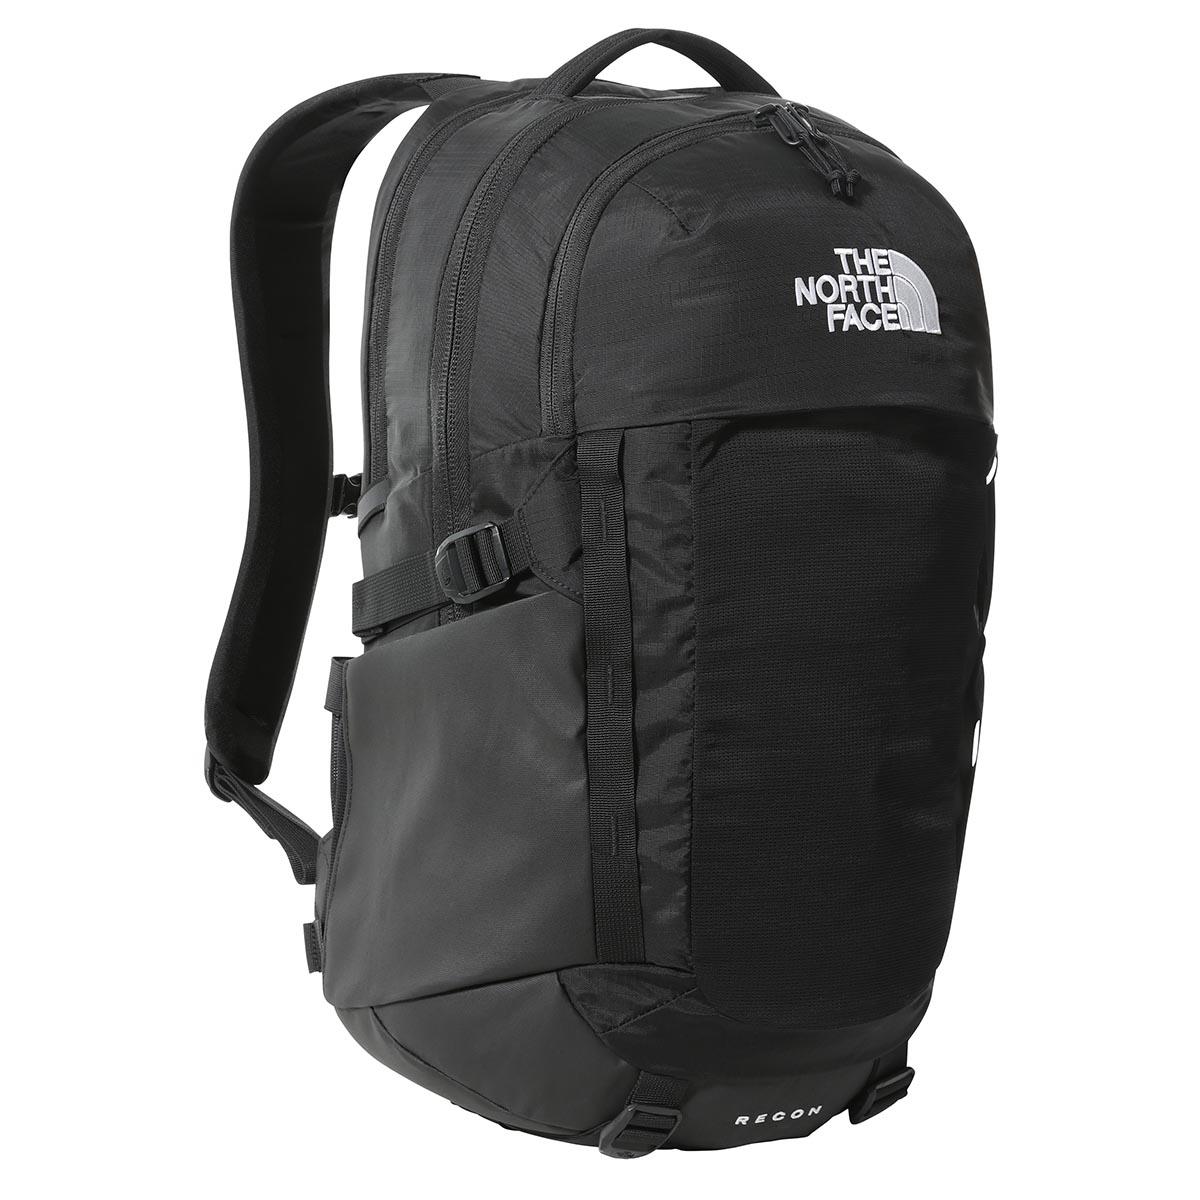  The Northface RECON NF0A52SHKX71